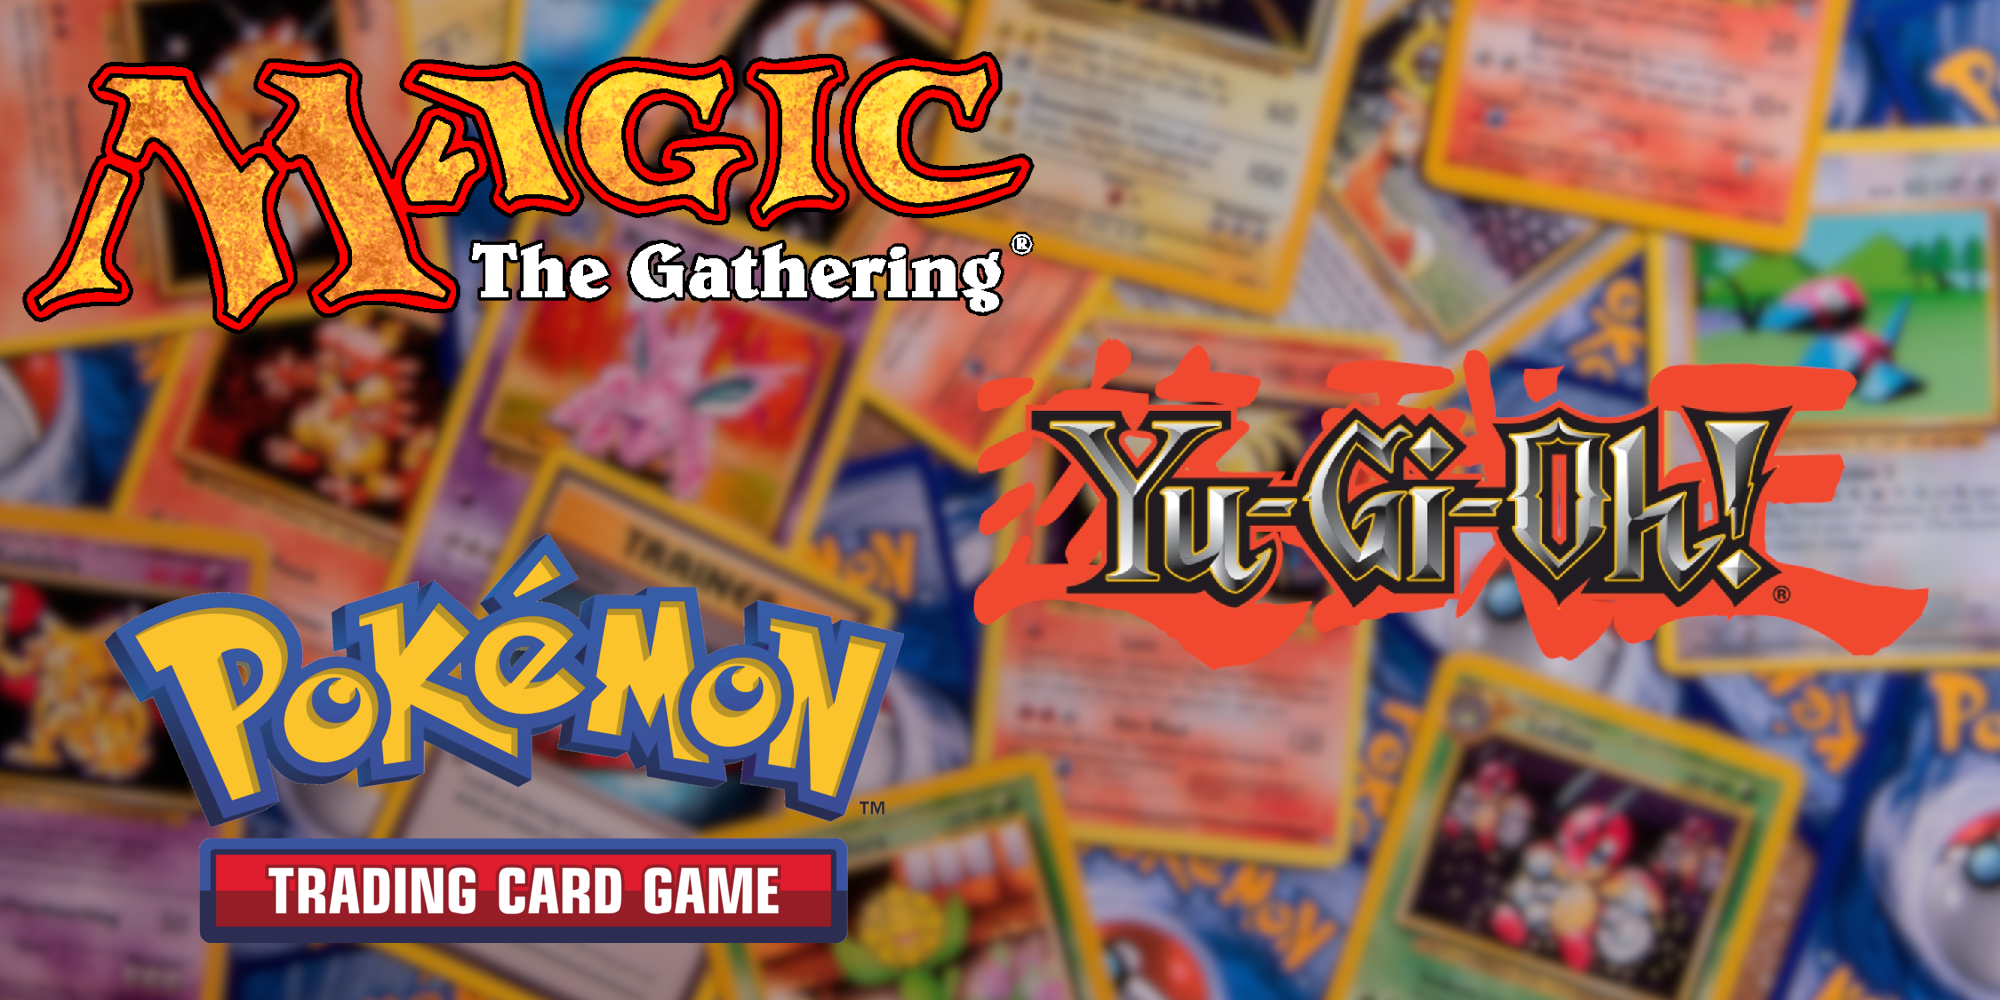 Which cards are the most expensive among Magic, Yu Gi Oh and Pokemon